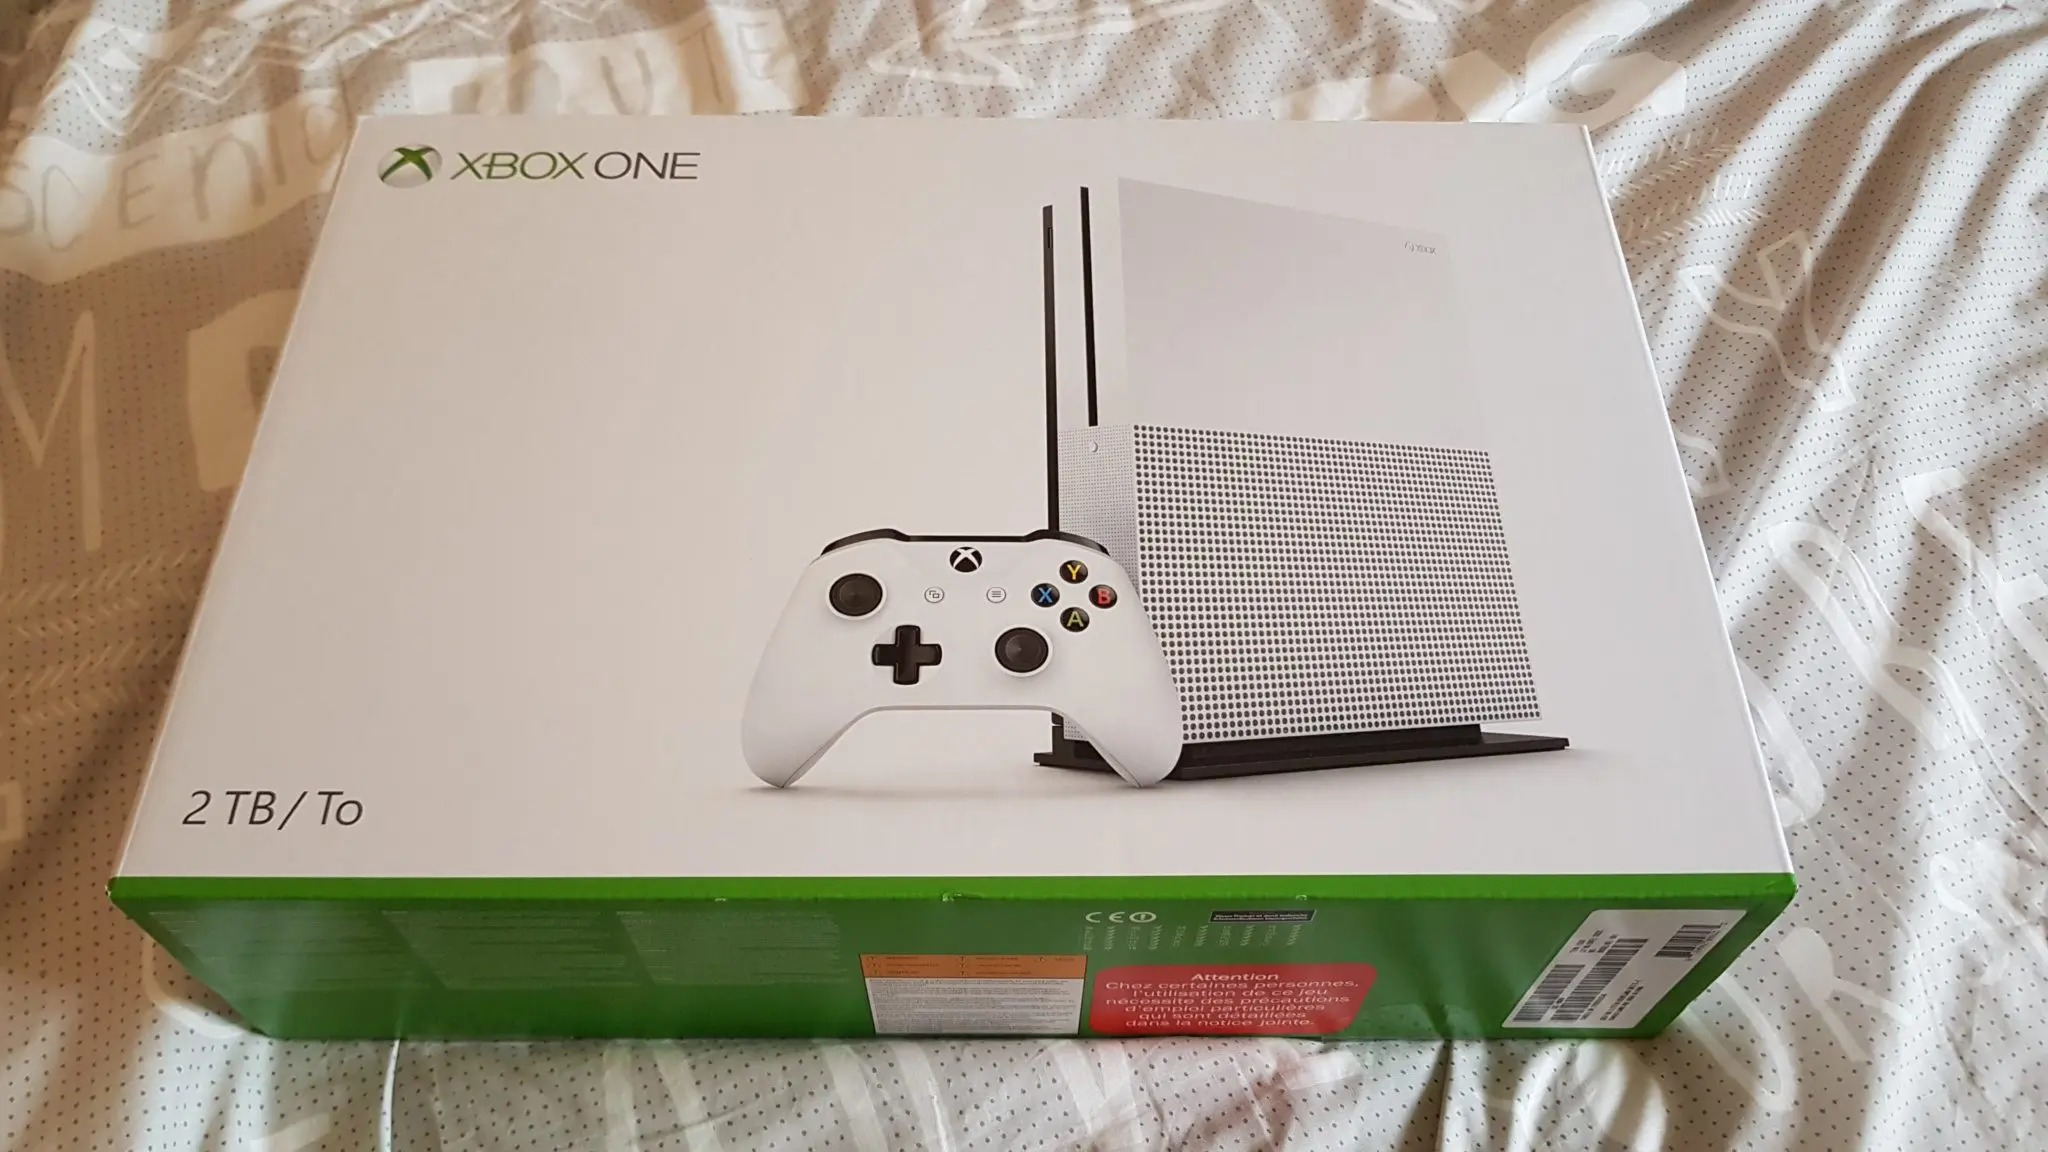 Unboxing Xbox One S Forza Horizon 4 Bundle - One of the top Xbox games of  the year 